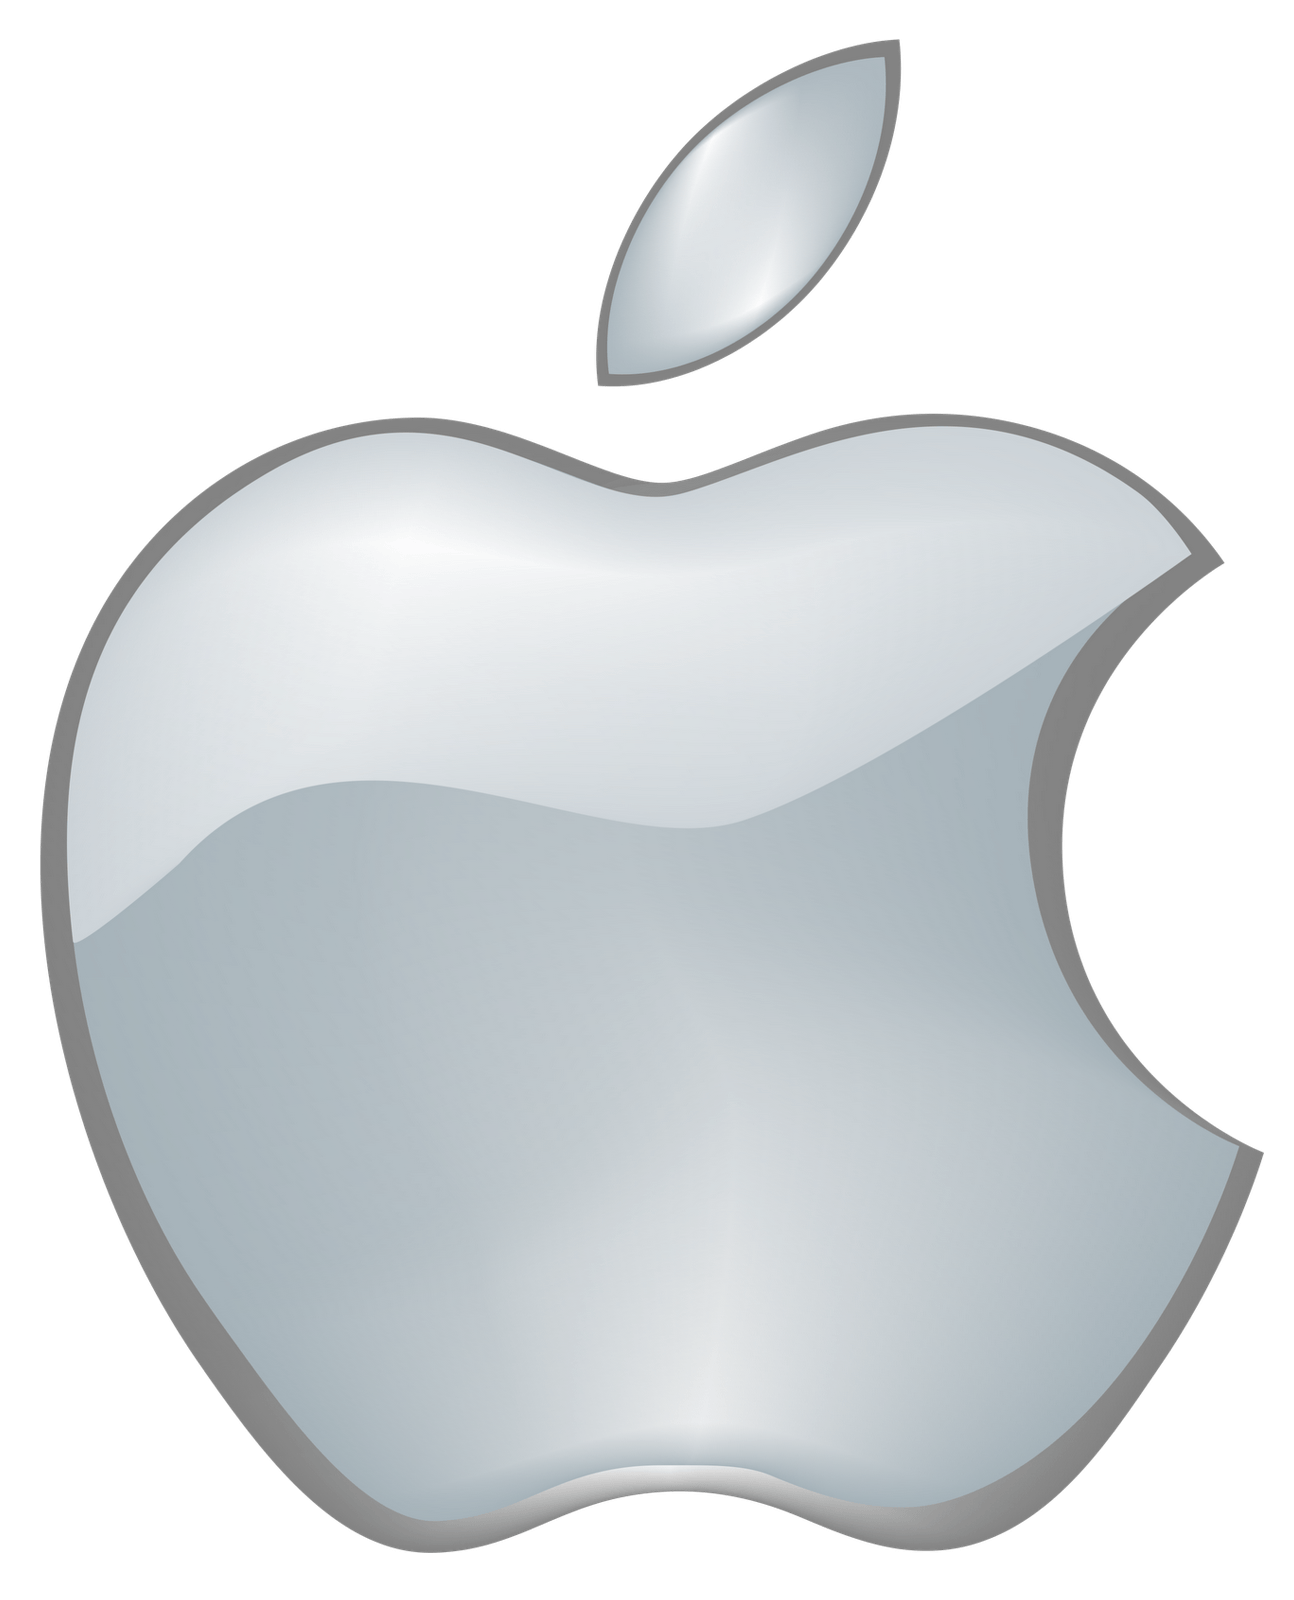 No Apple Logo - Apple logo graphic black and white download transparent background ...